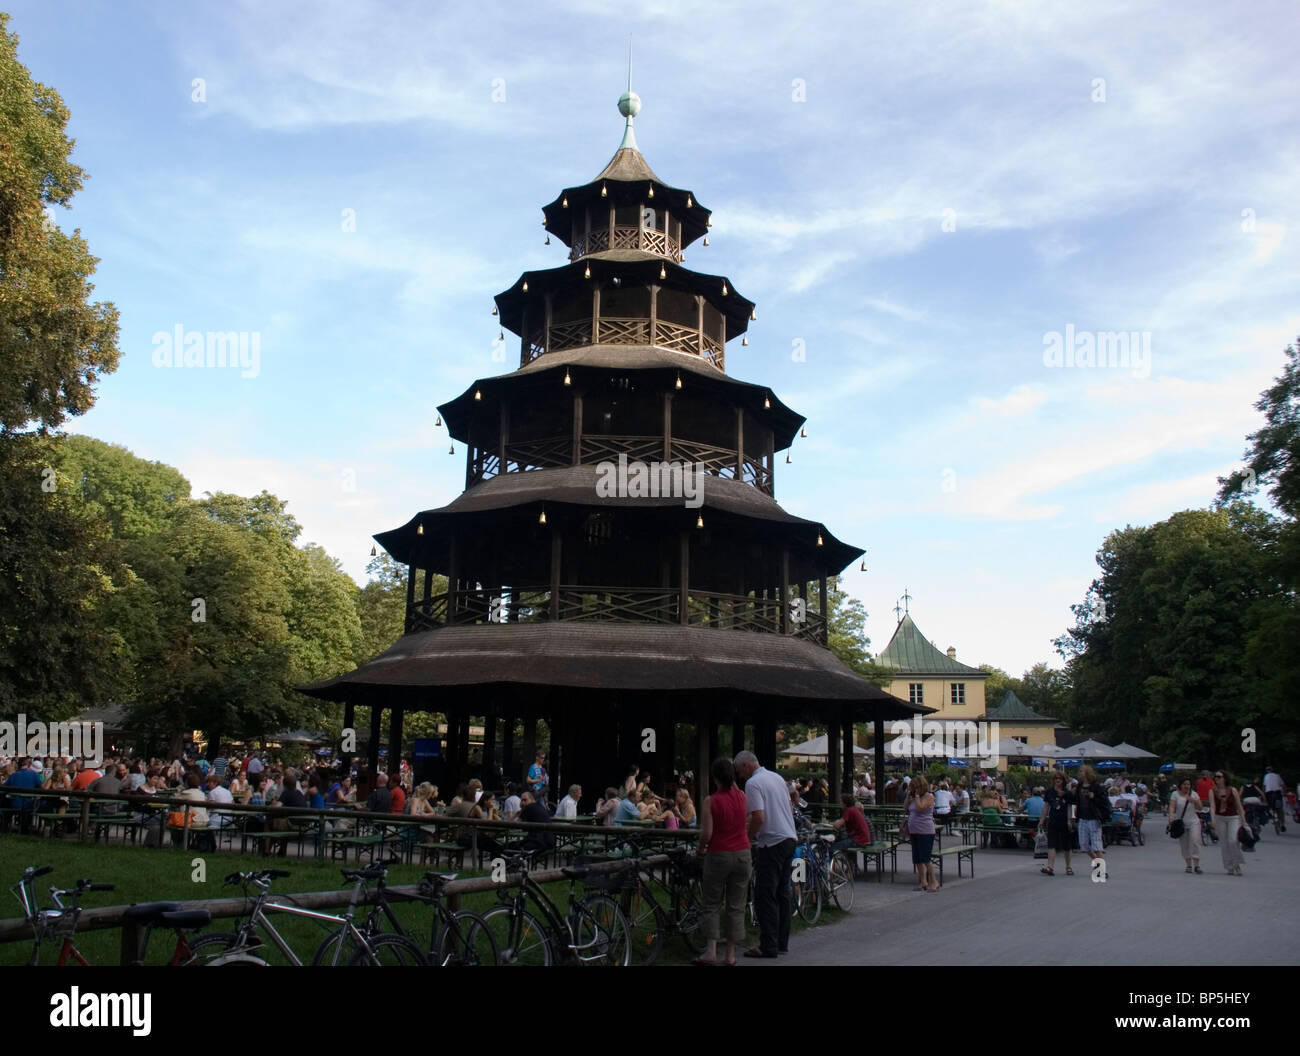 The Chinesischer Turm ('Chinese Tower') is a 25 metre high wooden structure, in the Englisher garden in Munich, Germany Stock Photo